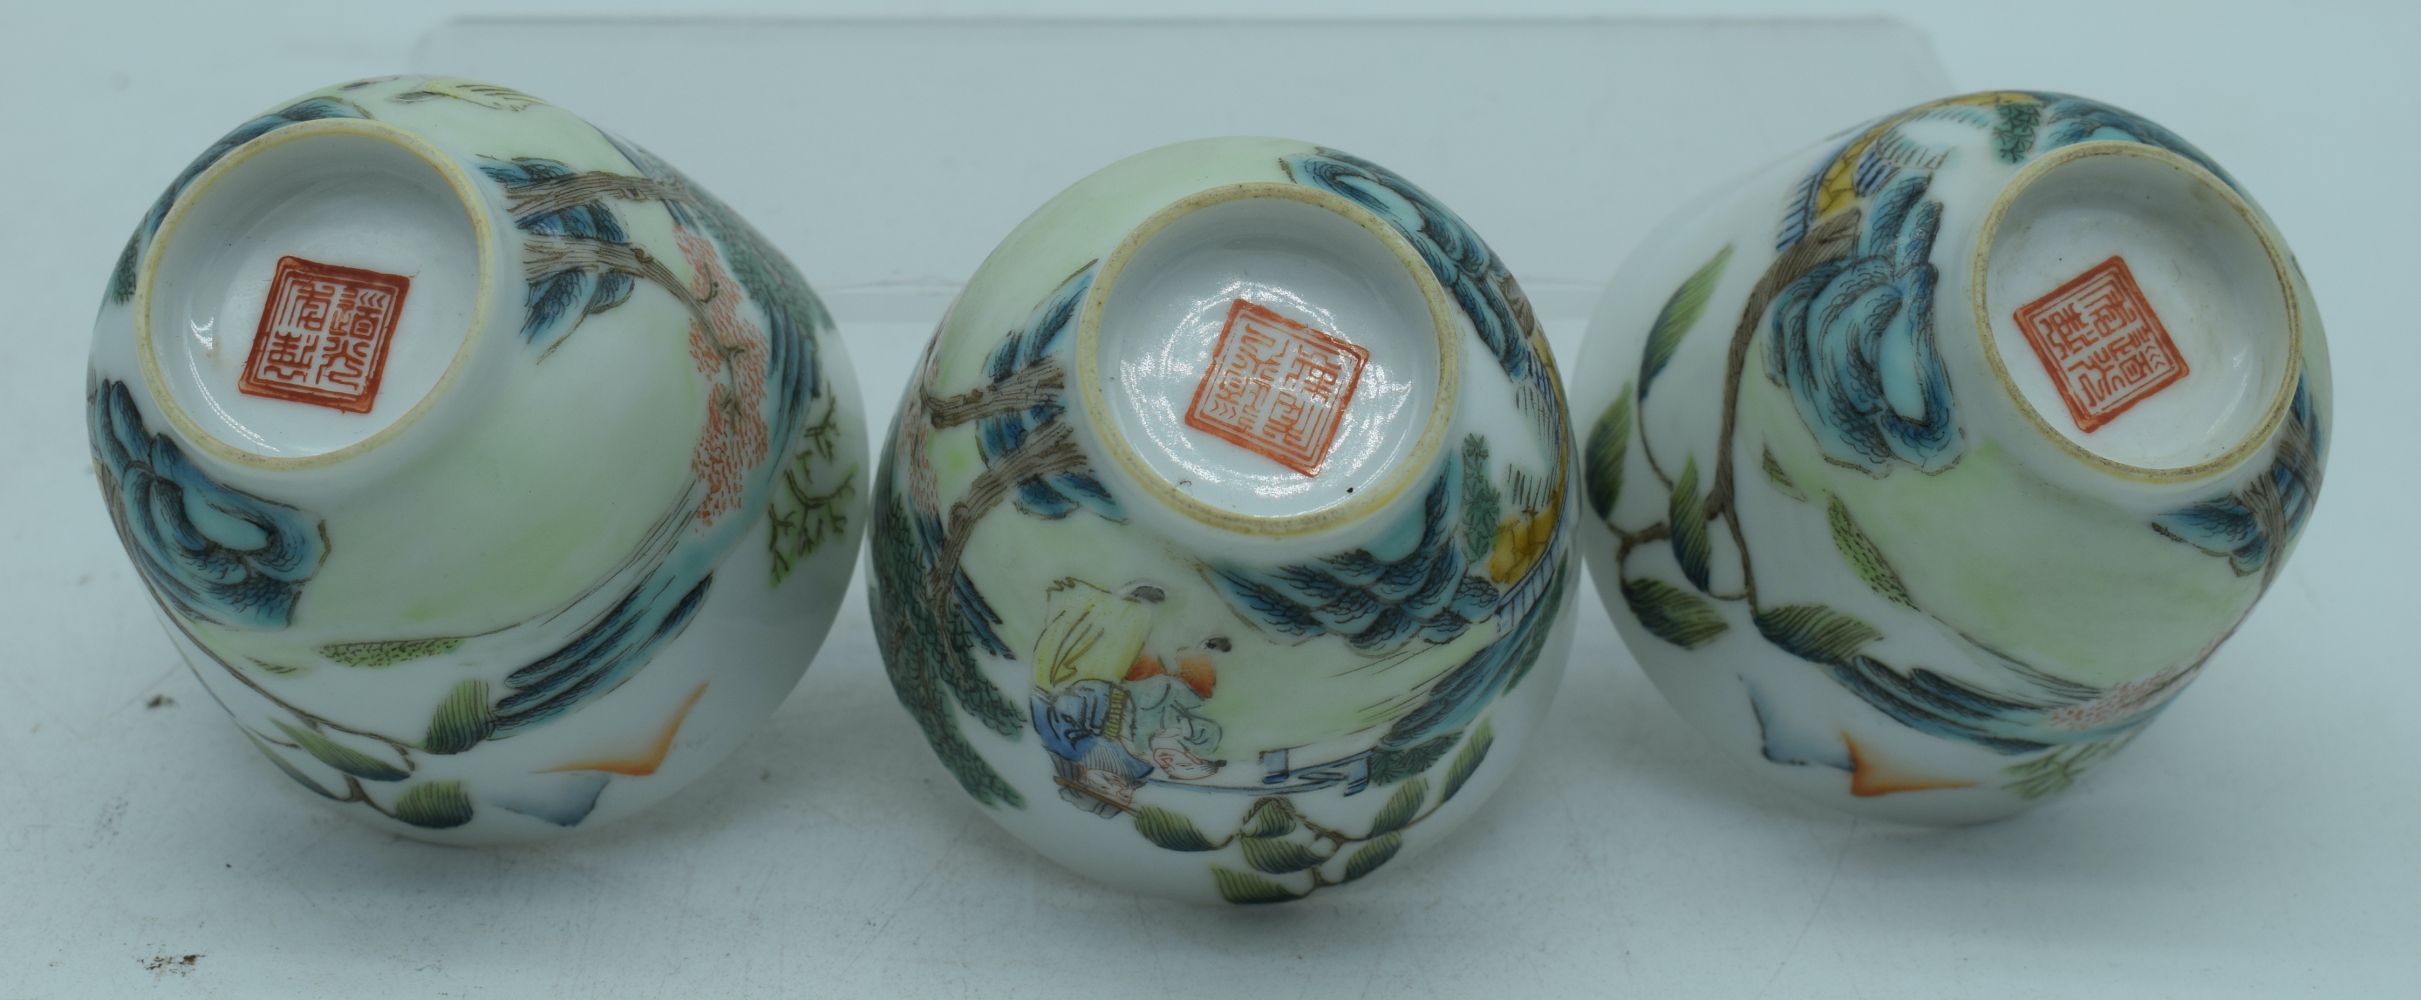 Three Chinese porcelain tea bowls decorated with figures in a landscape 6 x 7 cm (3) - Image 6 of 6